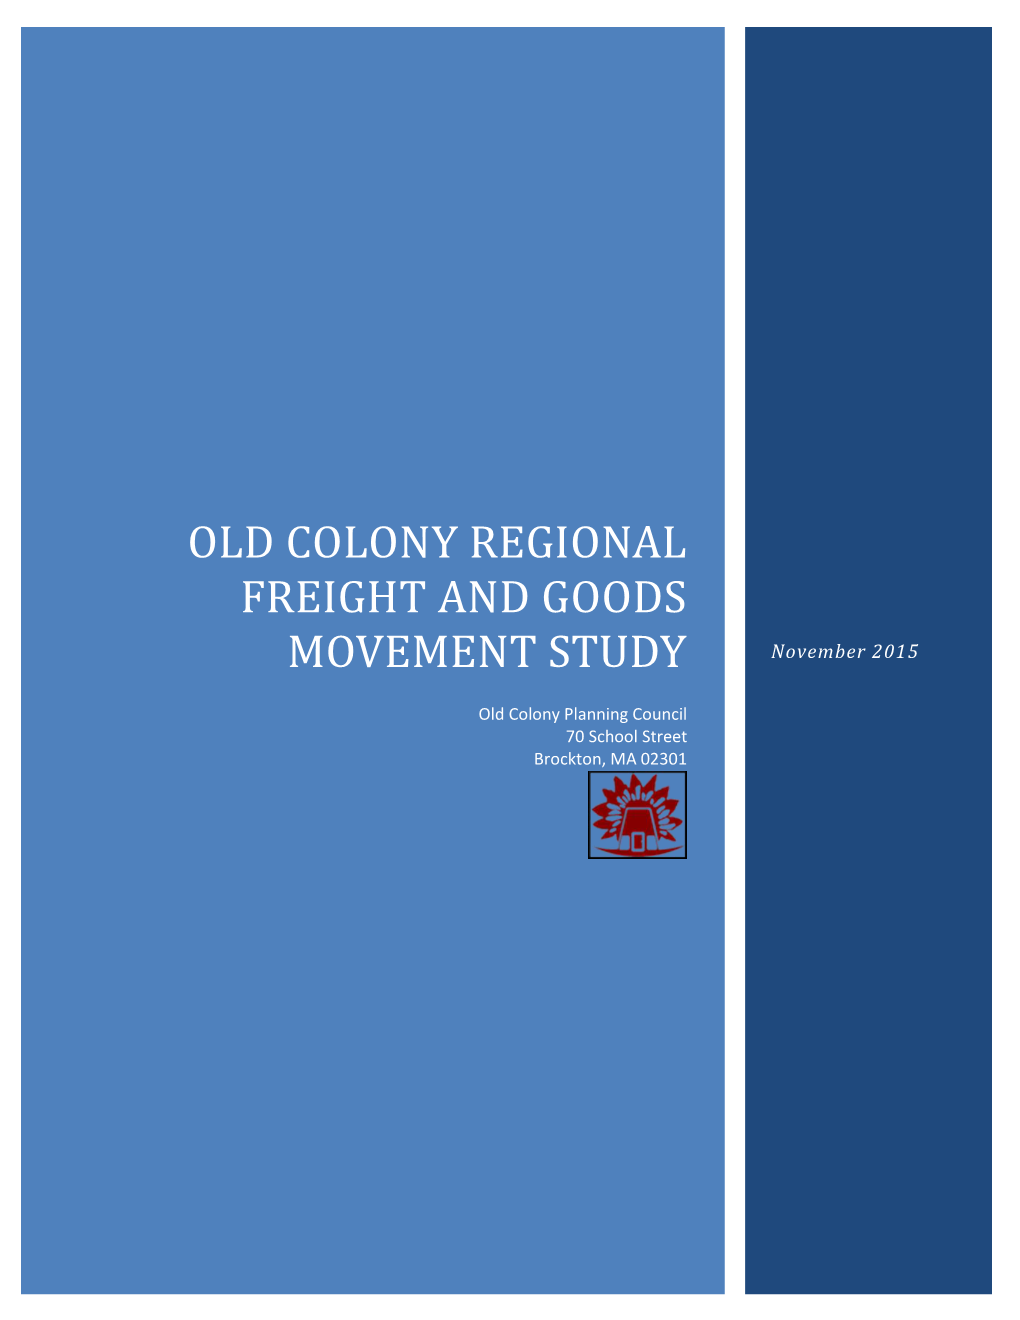 OLD COLONY REGIONAL FREIGHT and GOODS MOVEMENT STUDY November 2015